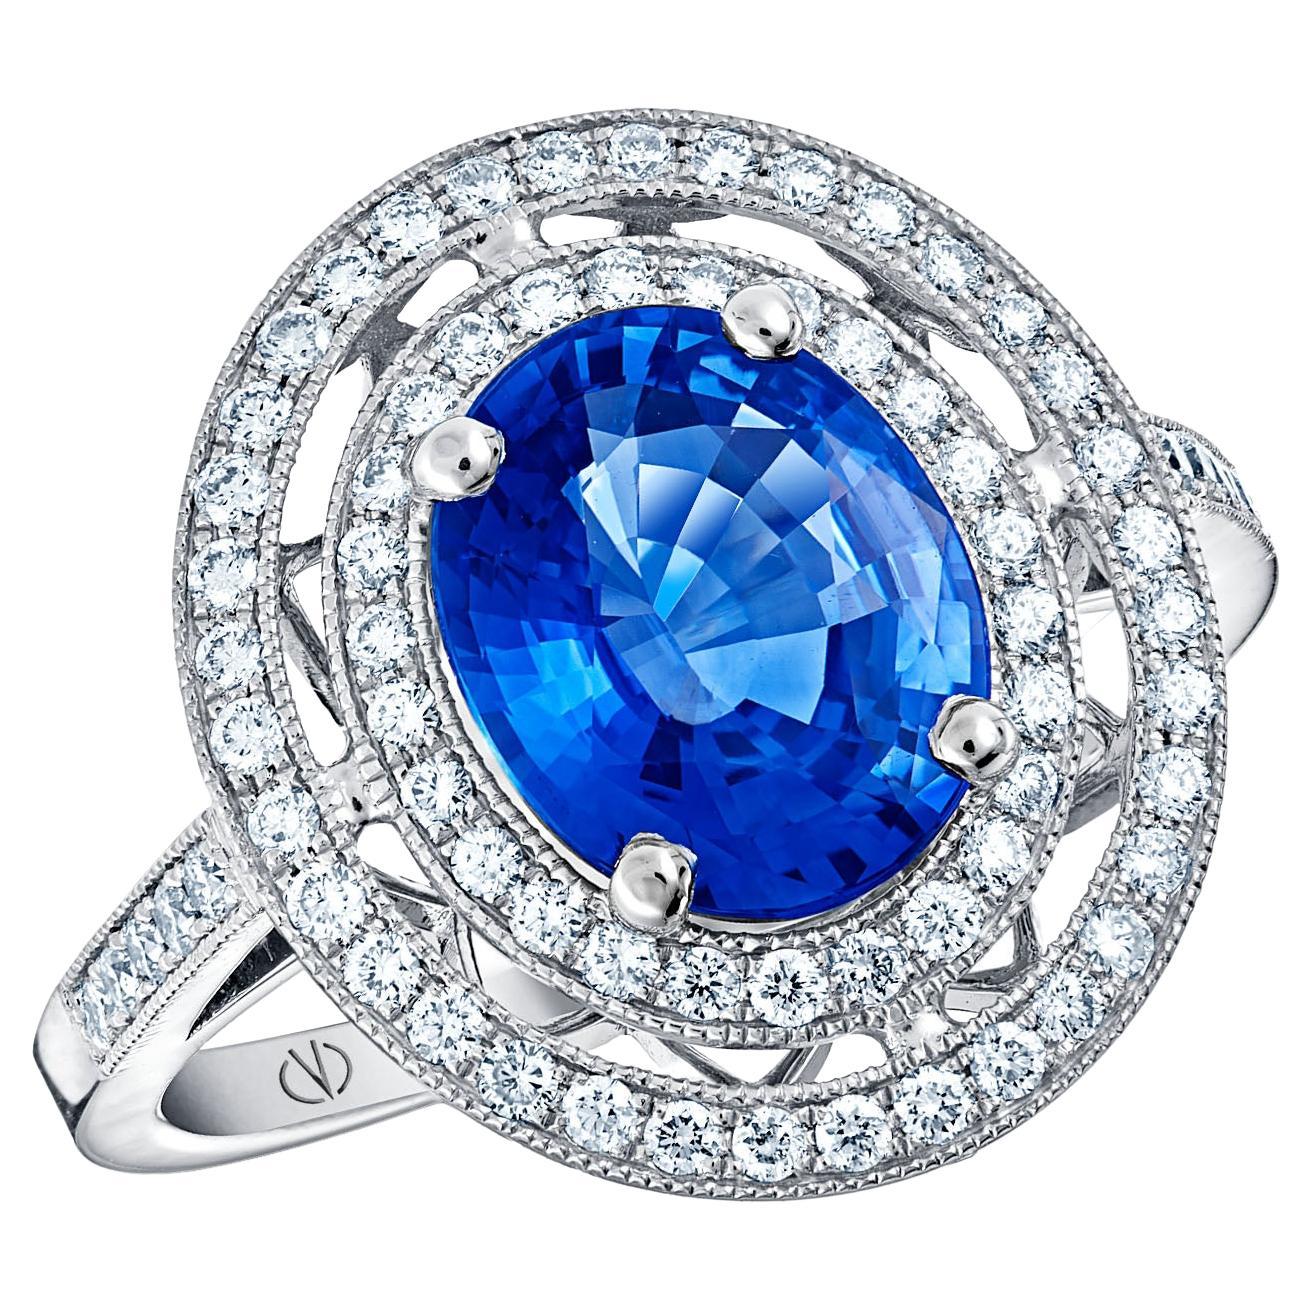 18k White Gold 2.74 Ct Royal Blue Oval Sapphire Ring With Two Rows of Diamonds